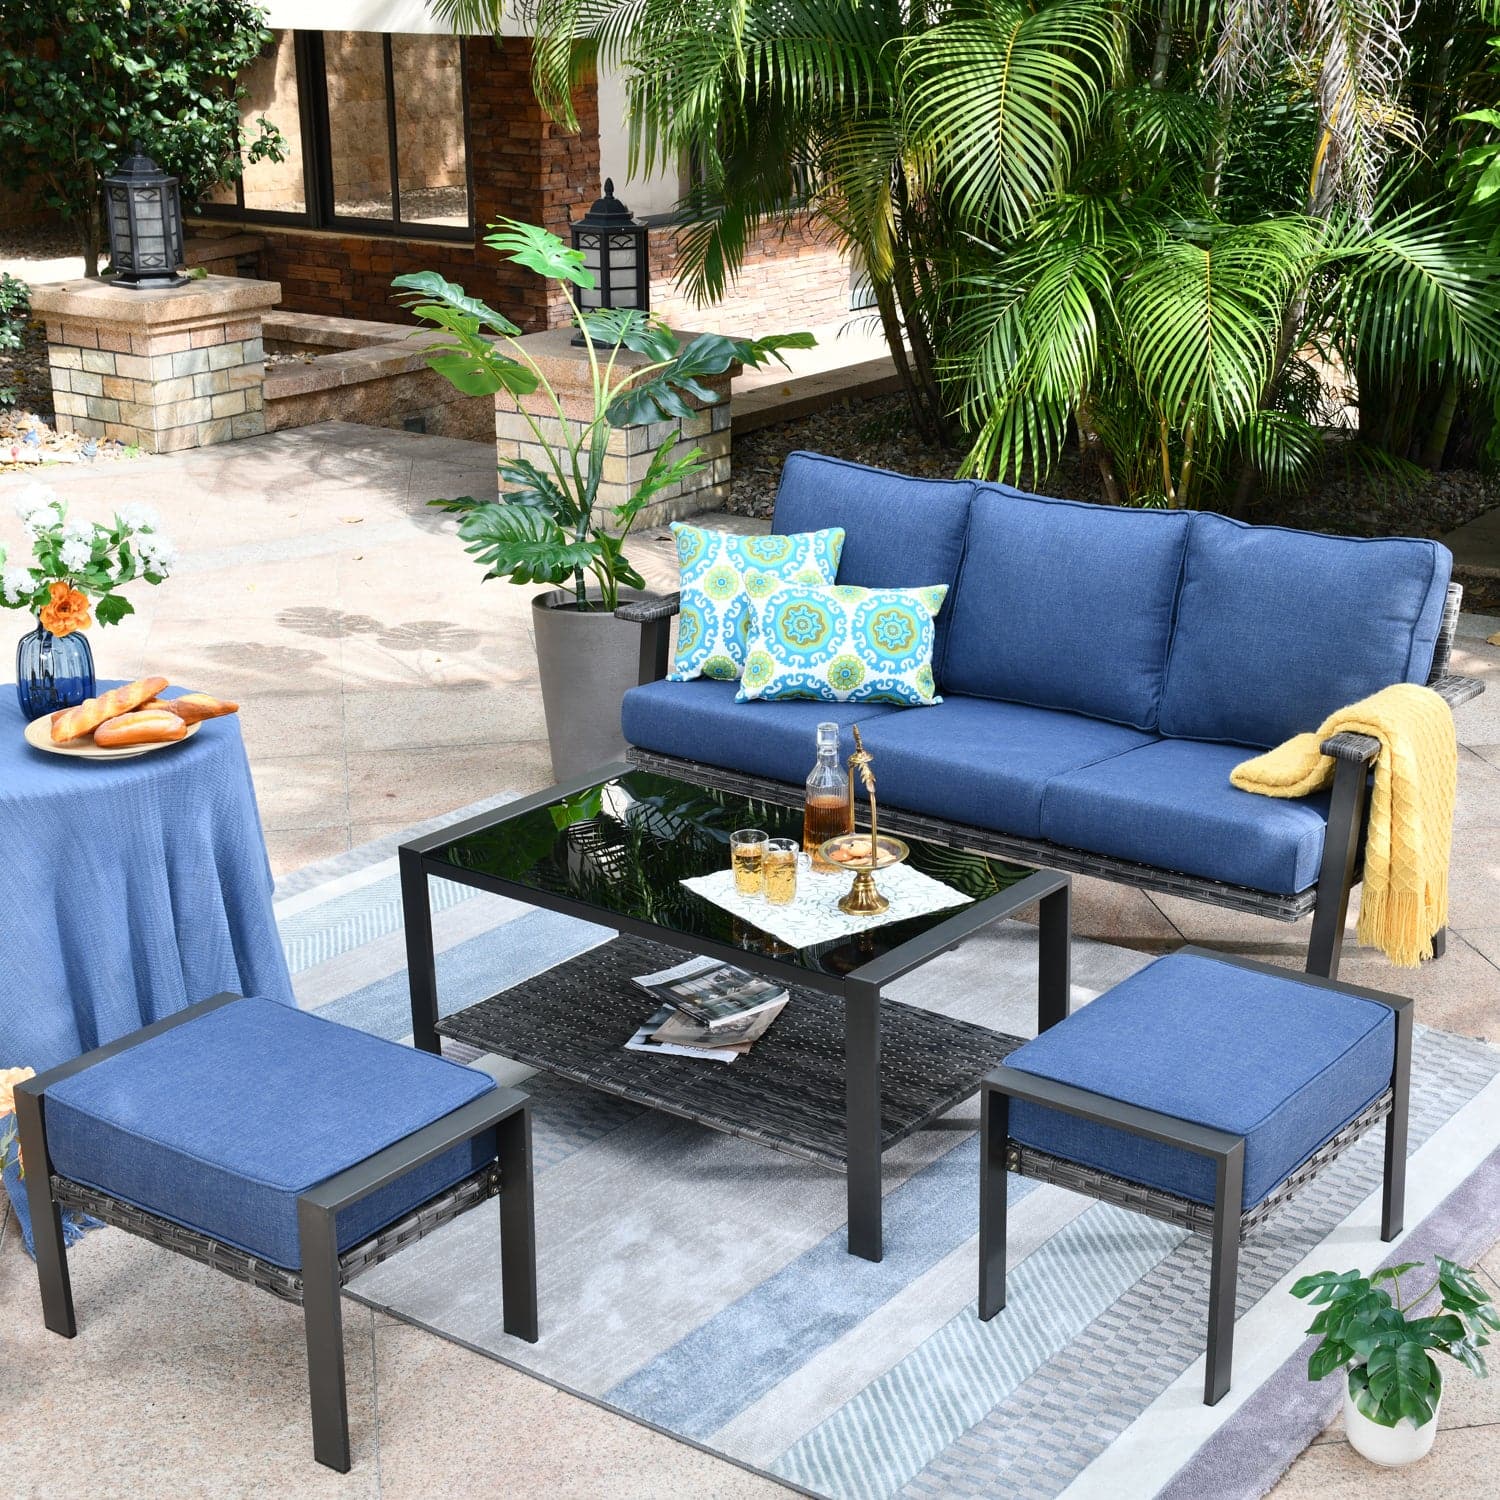 Outdoor Pillows with Insert Blue Geometric Patio Accent Throw Pillows –  Fabritones